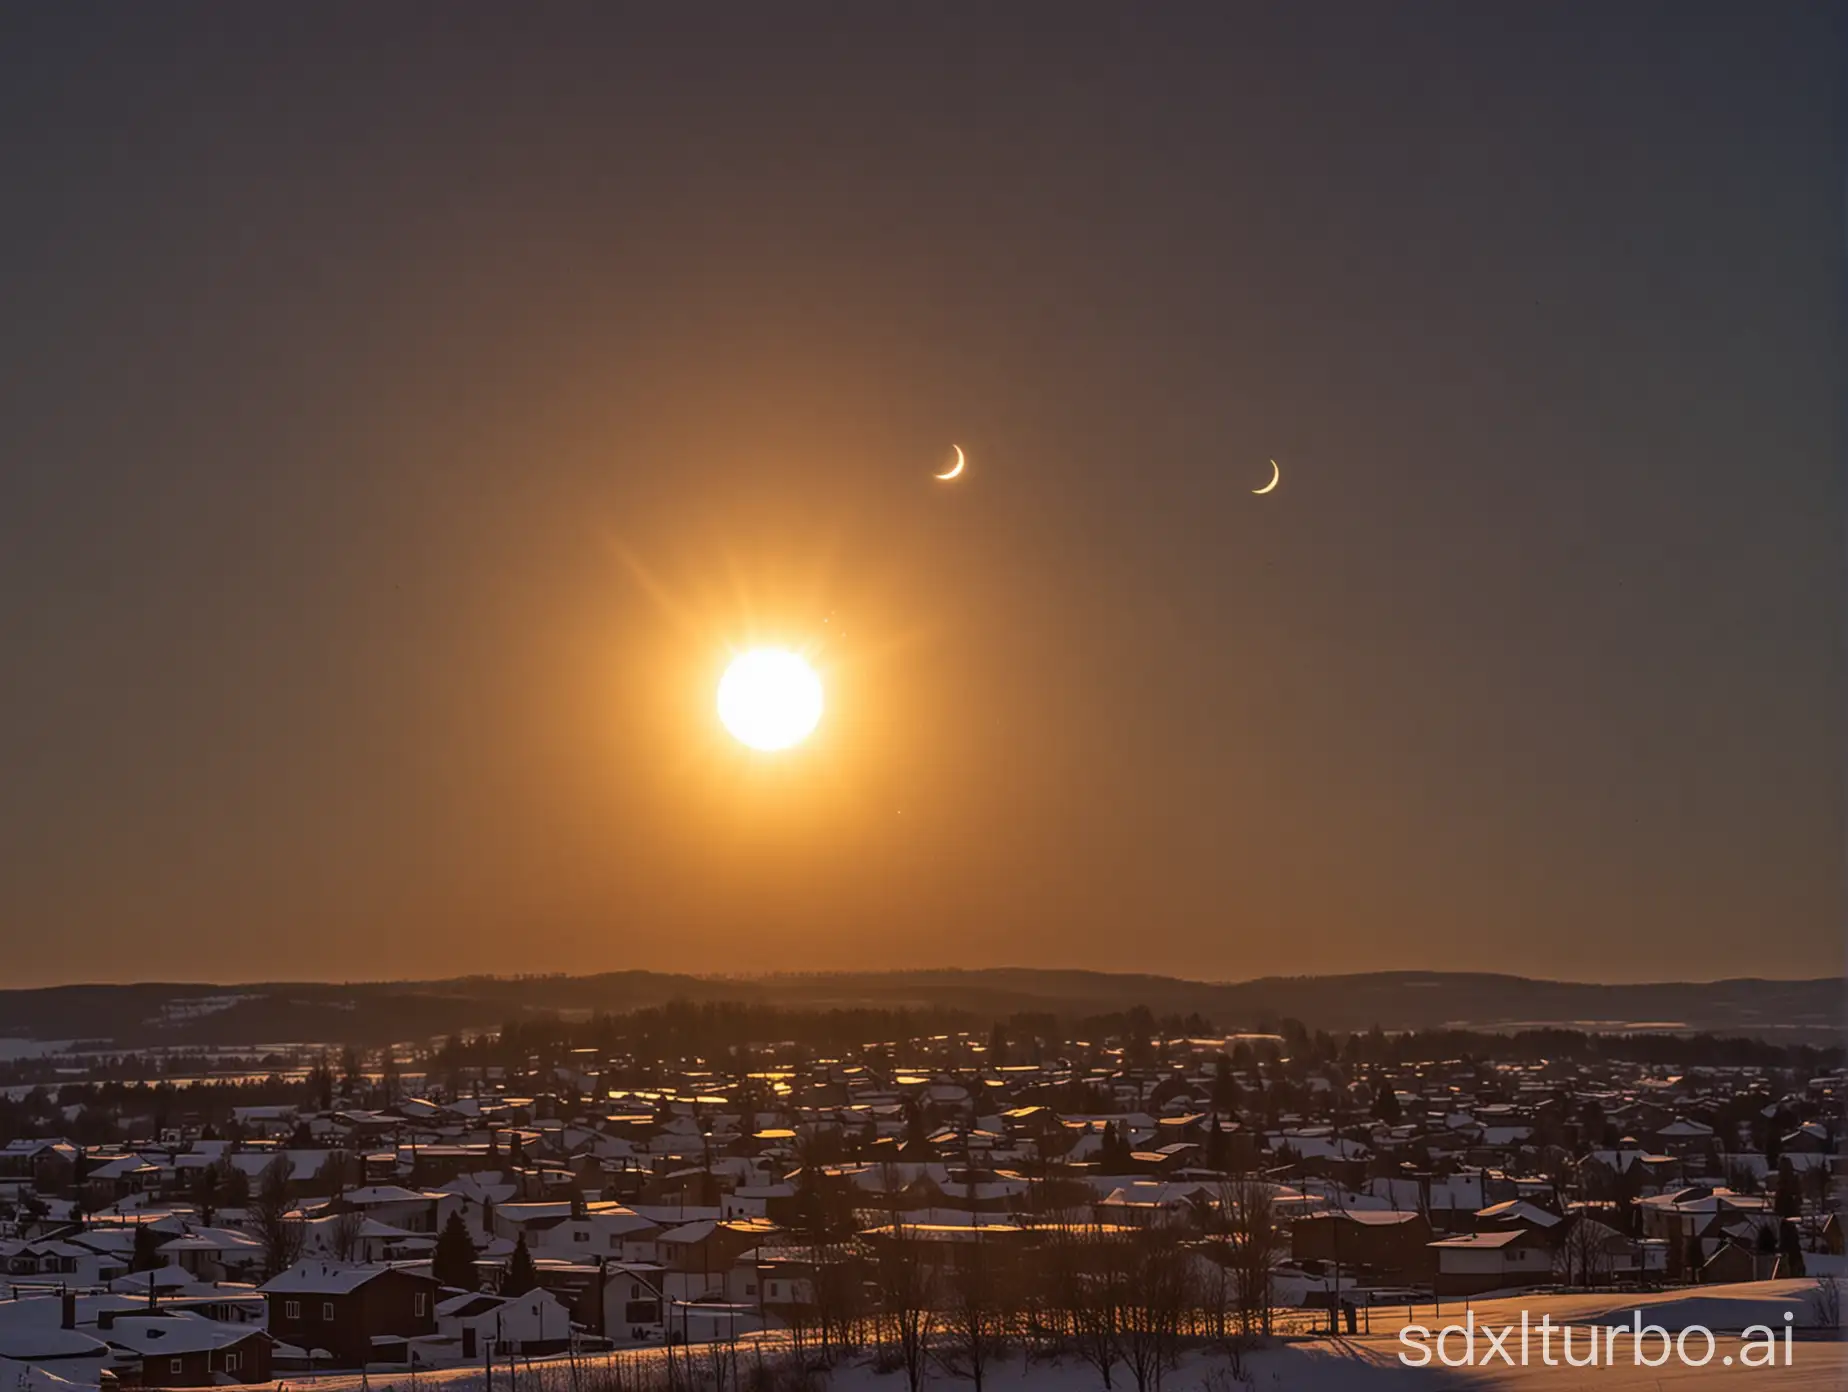 Solar-Eclipse-in-a-Small-Town-Spectacular-Celestial-Event-Captured-Amid-Urban-Landscape